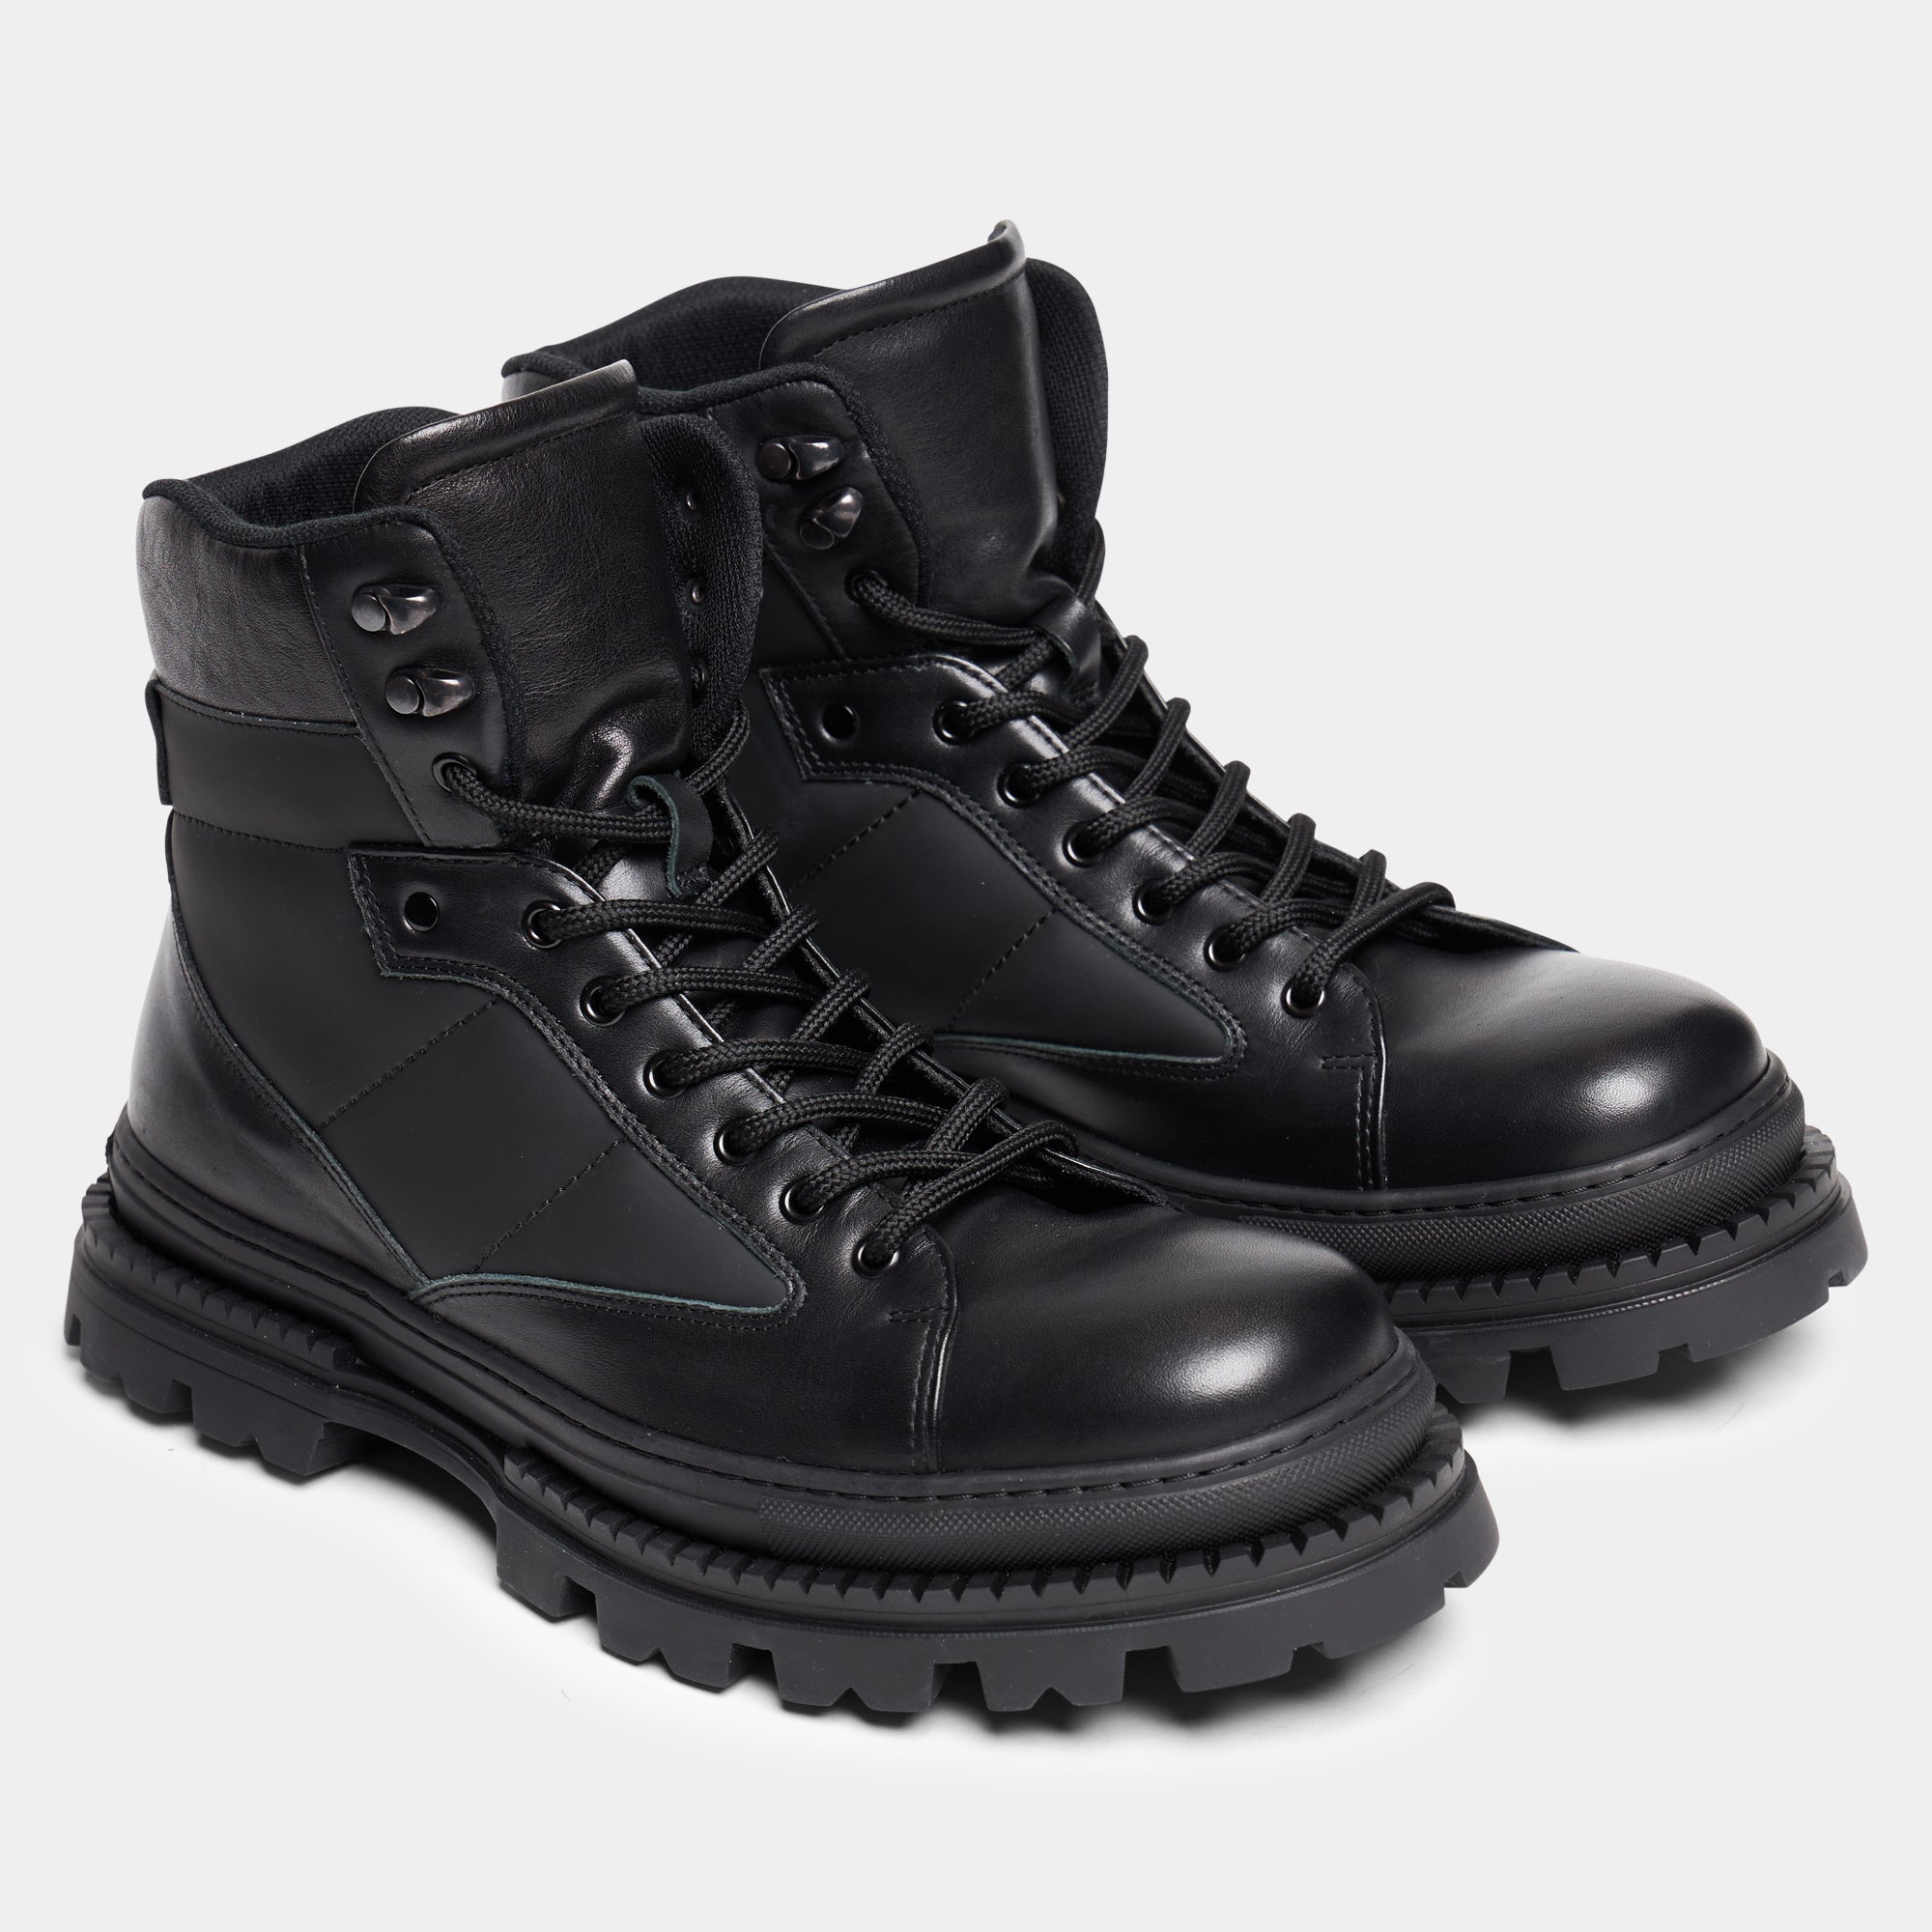 Ahler 99992 Laced boot Black